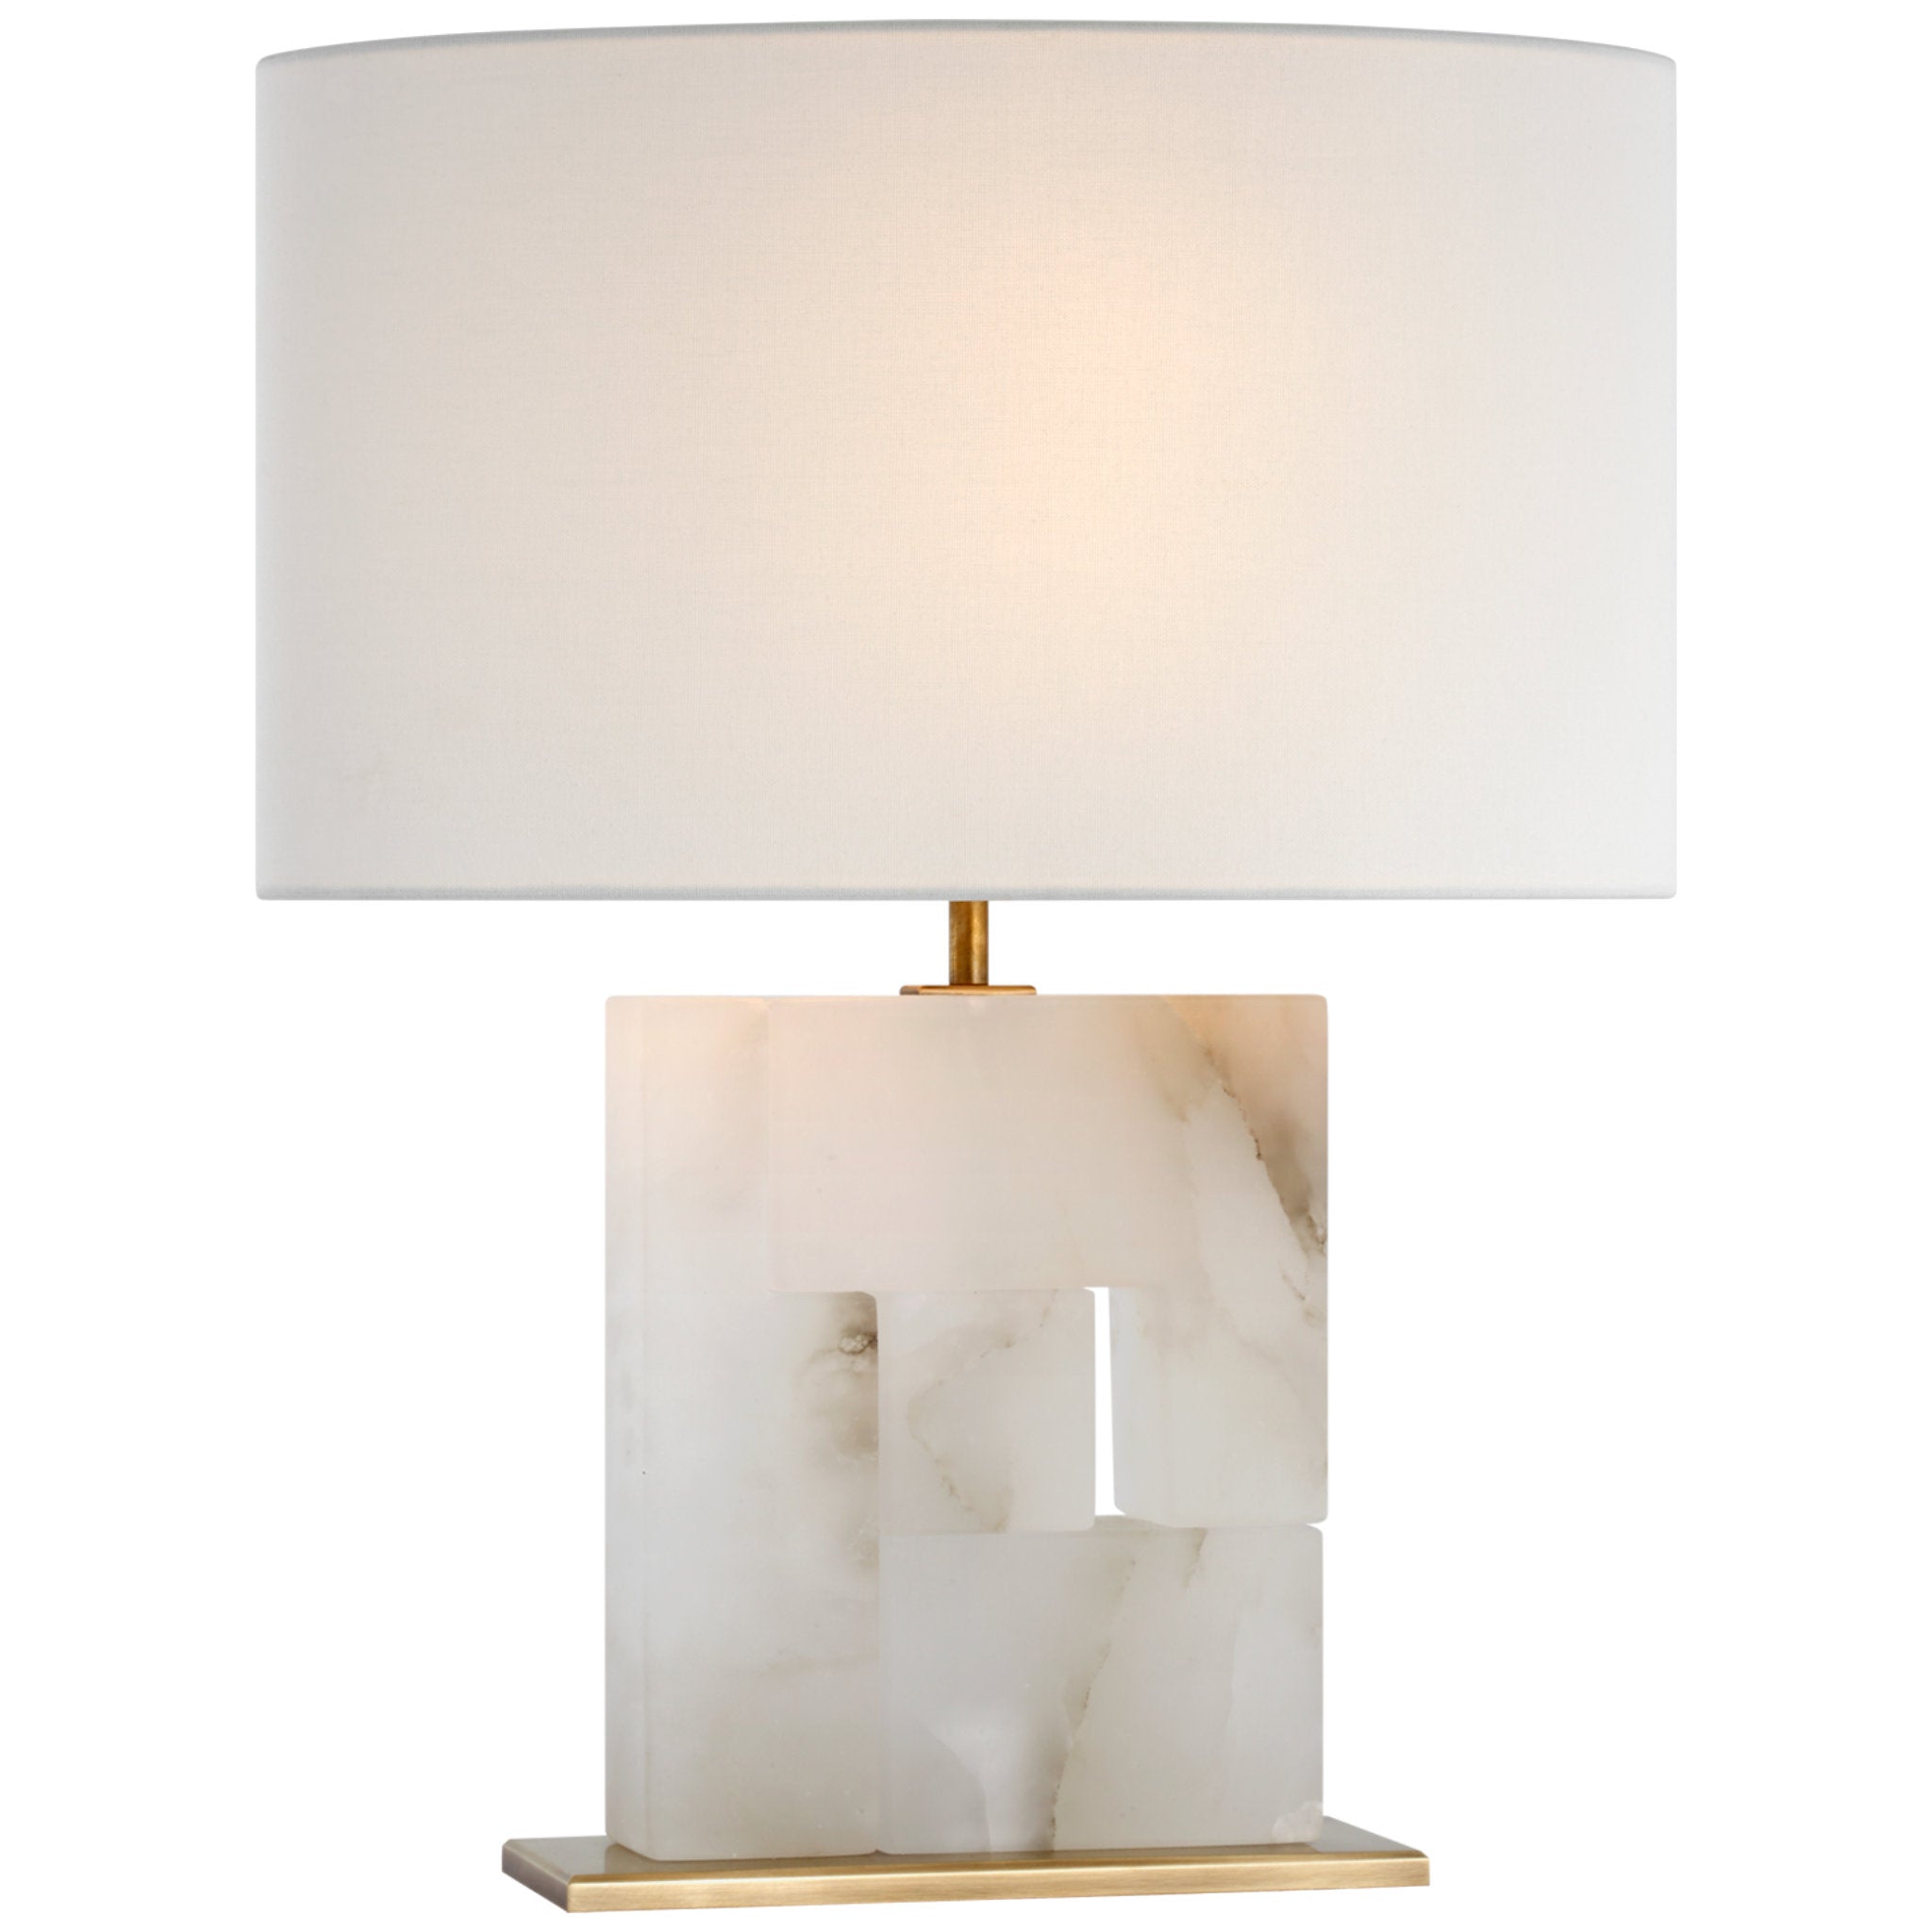 Ian K. Fowler Ashlar Medium Table Lamp in Alabaster and Hand-Rubbed Antique Brass with Linen Shade